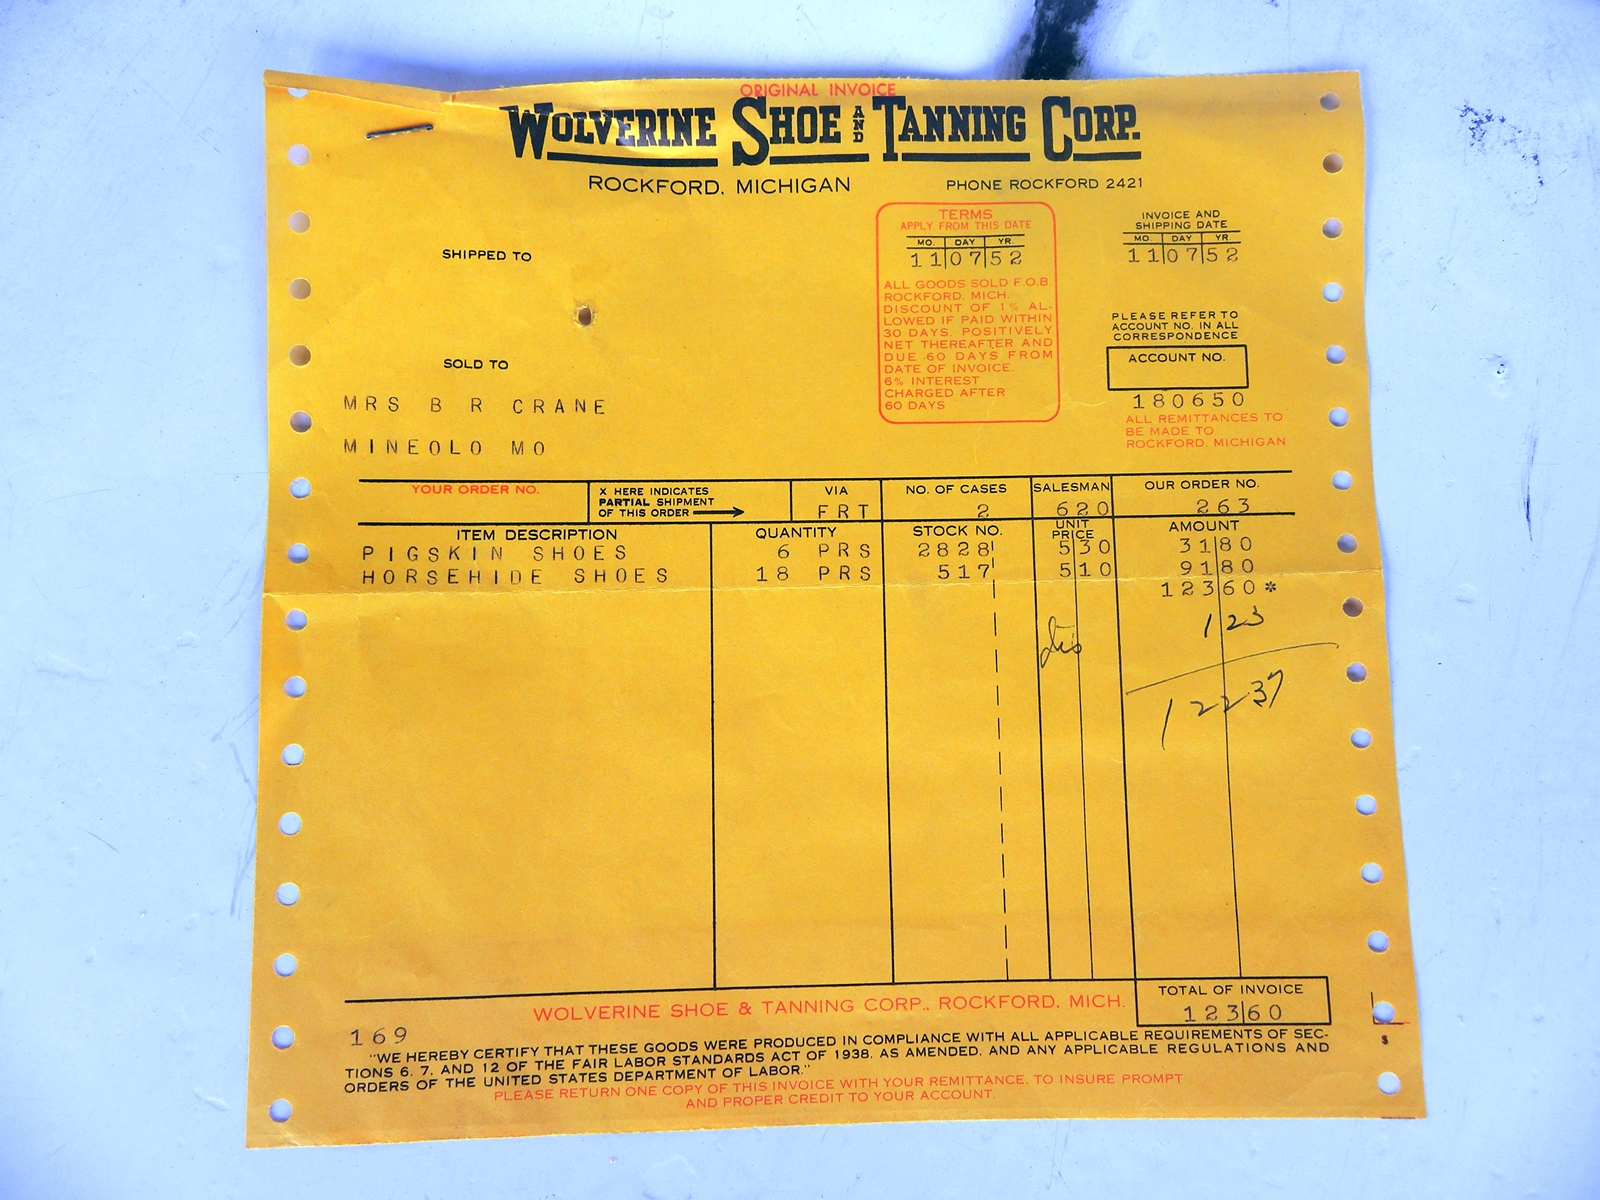 1952 Wolverine Invoice for pigskin and cordovan shoes.